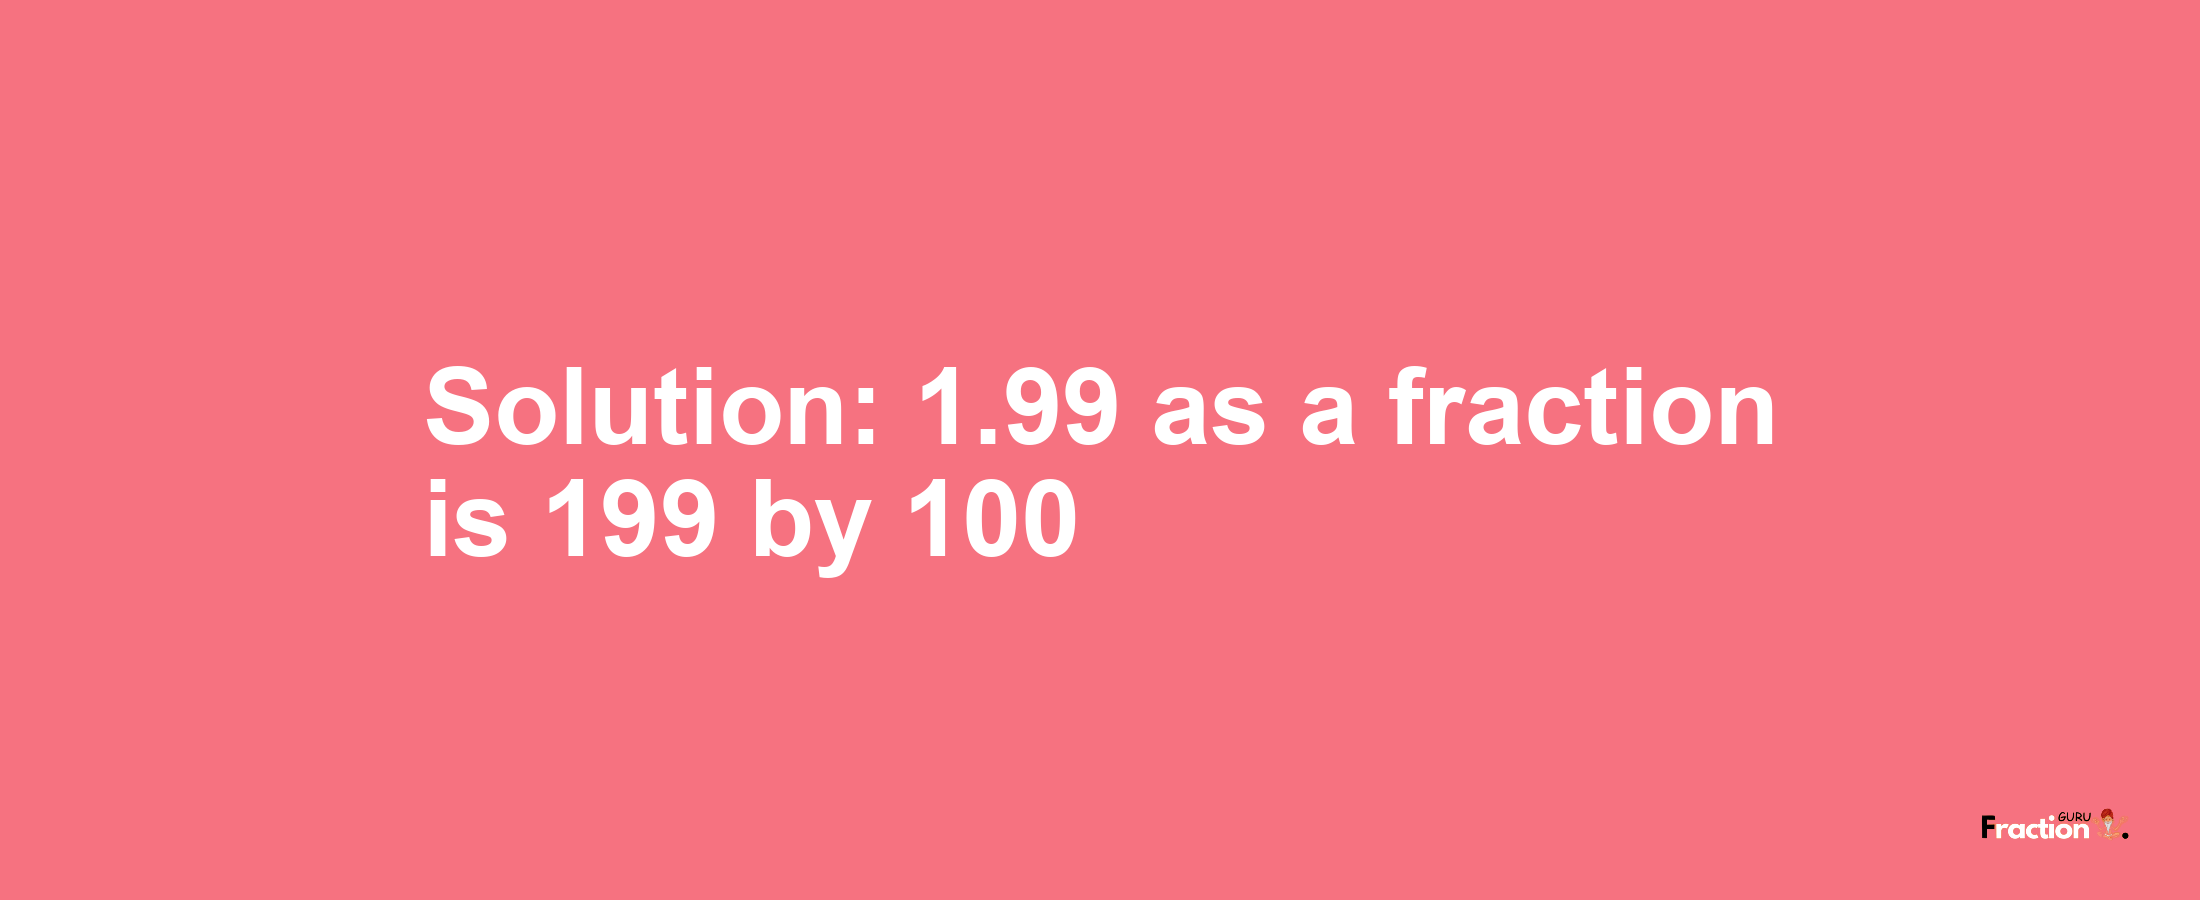 Solution:1.99 as a fraction is 199/100